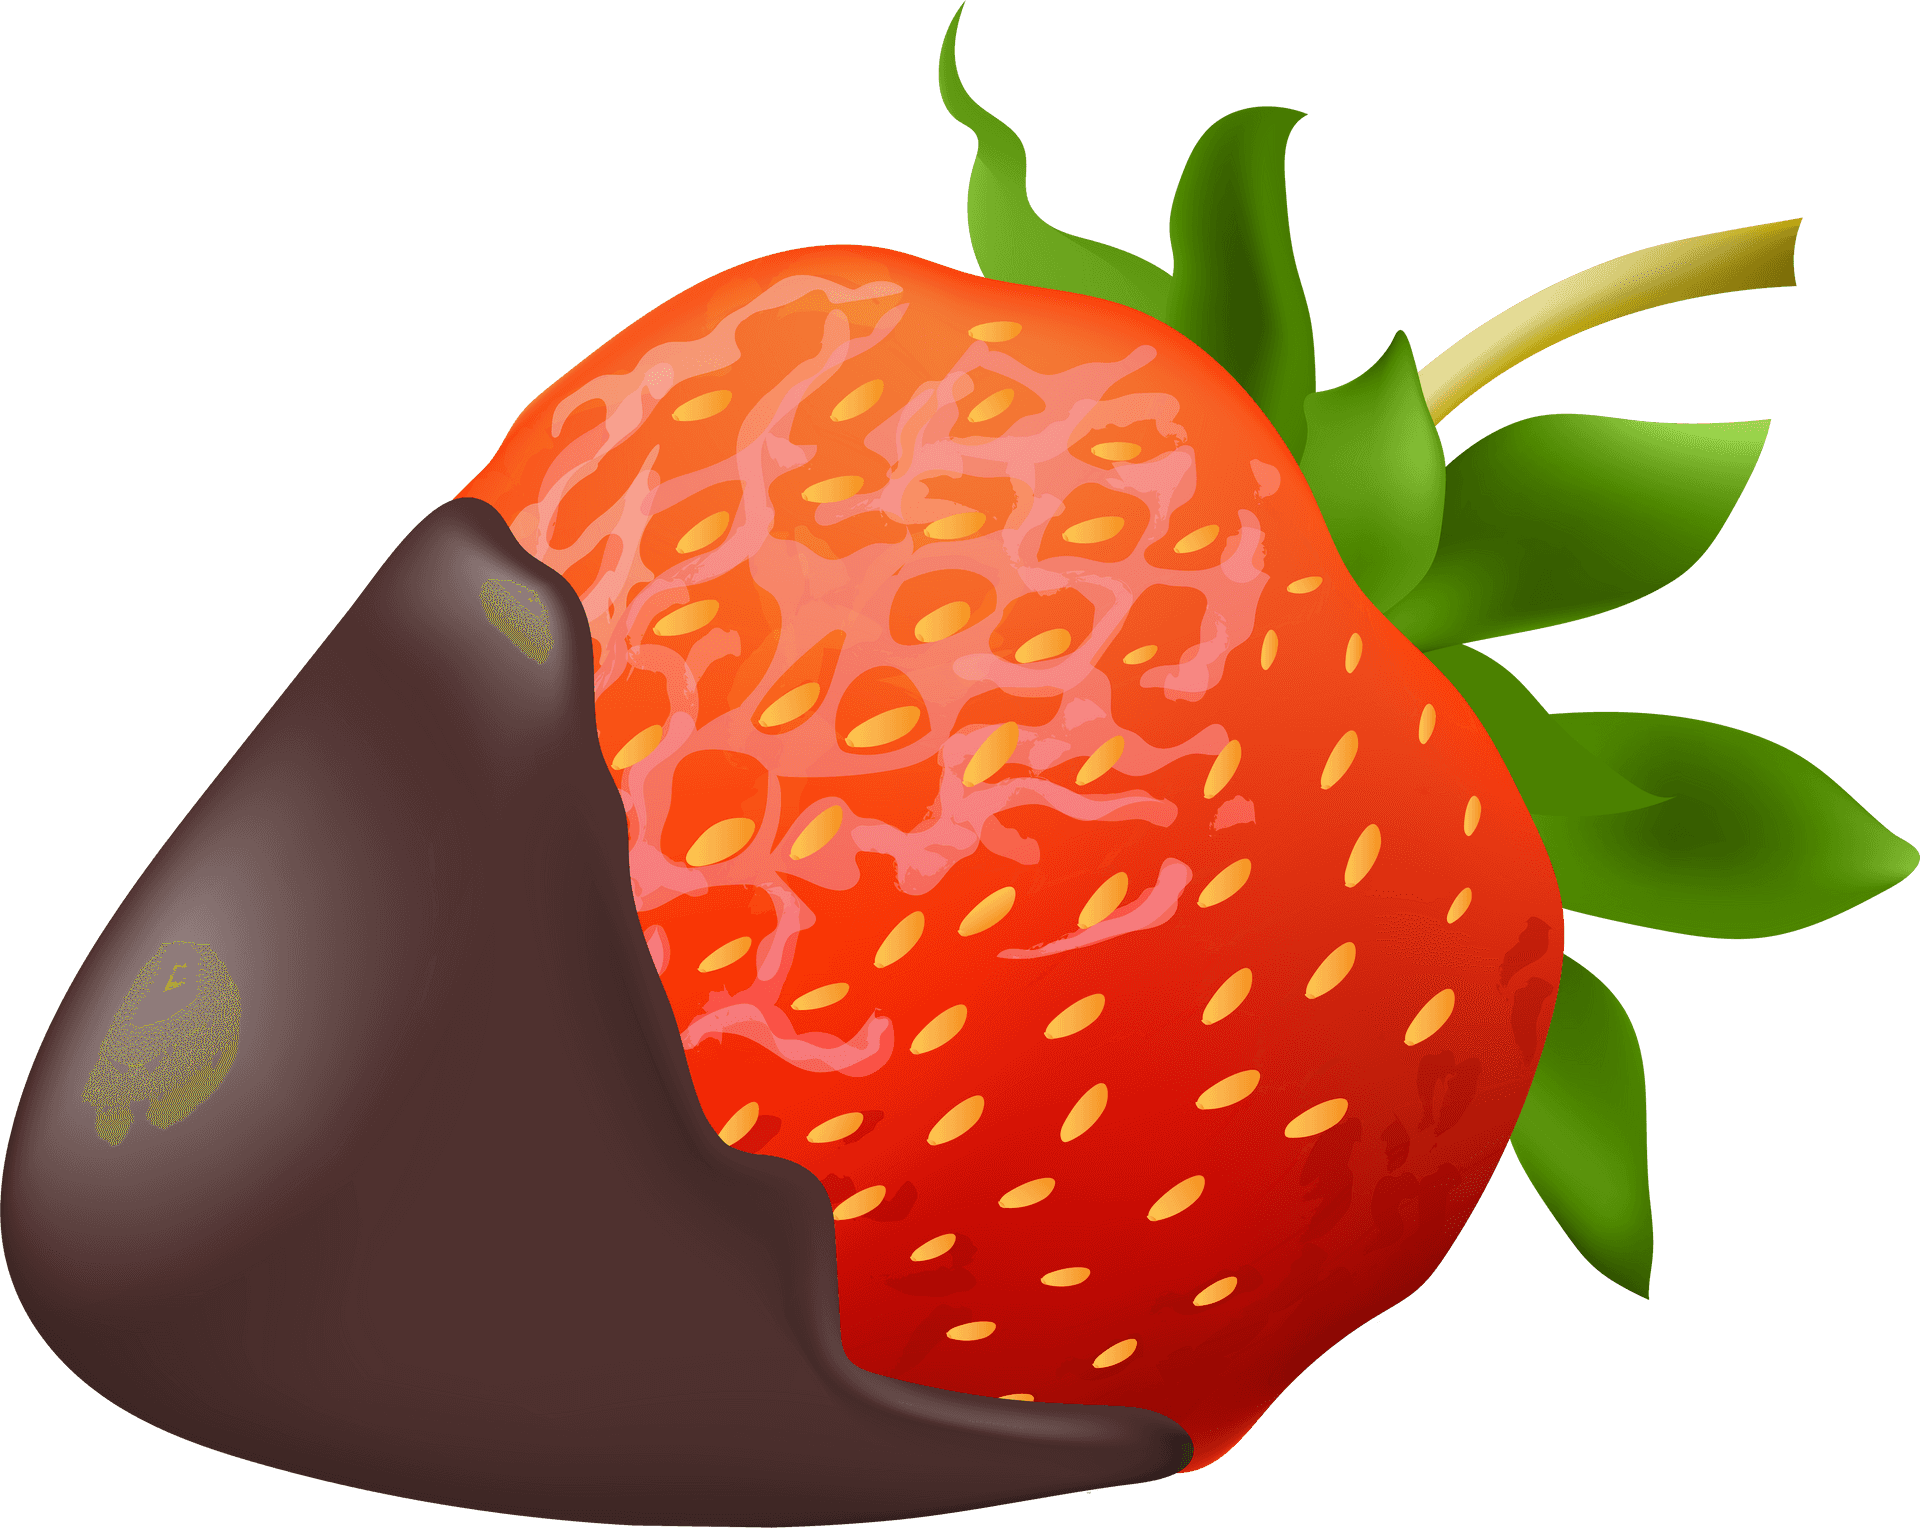 Chocolate Dipped Strawberry Illustration PNG image